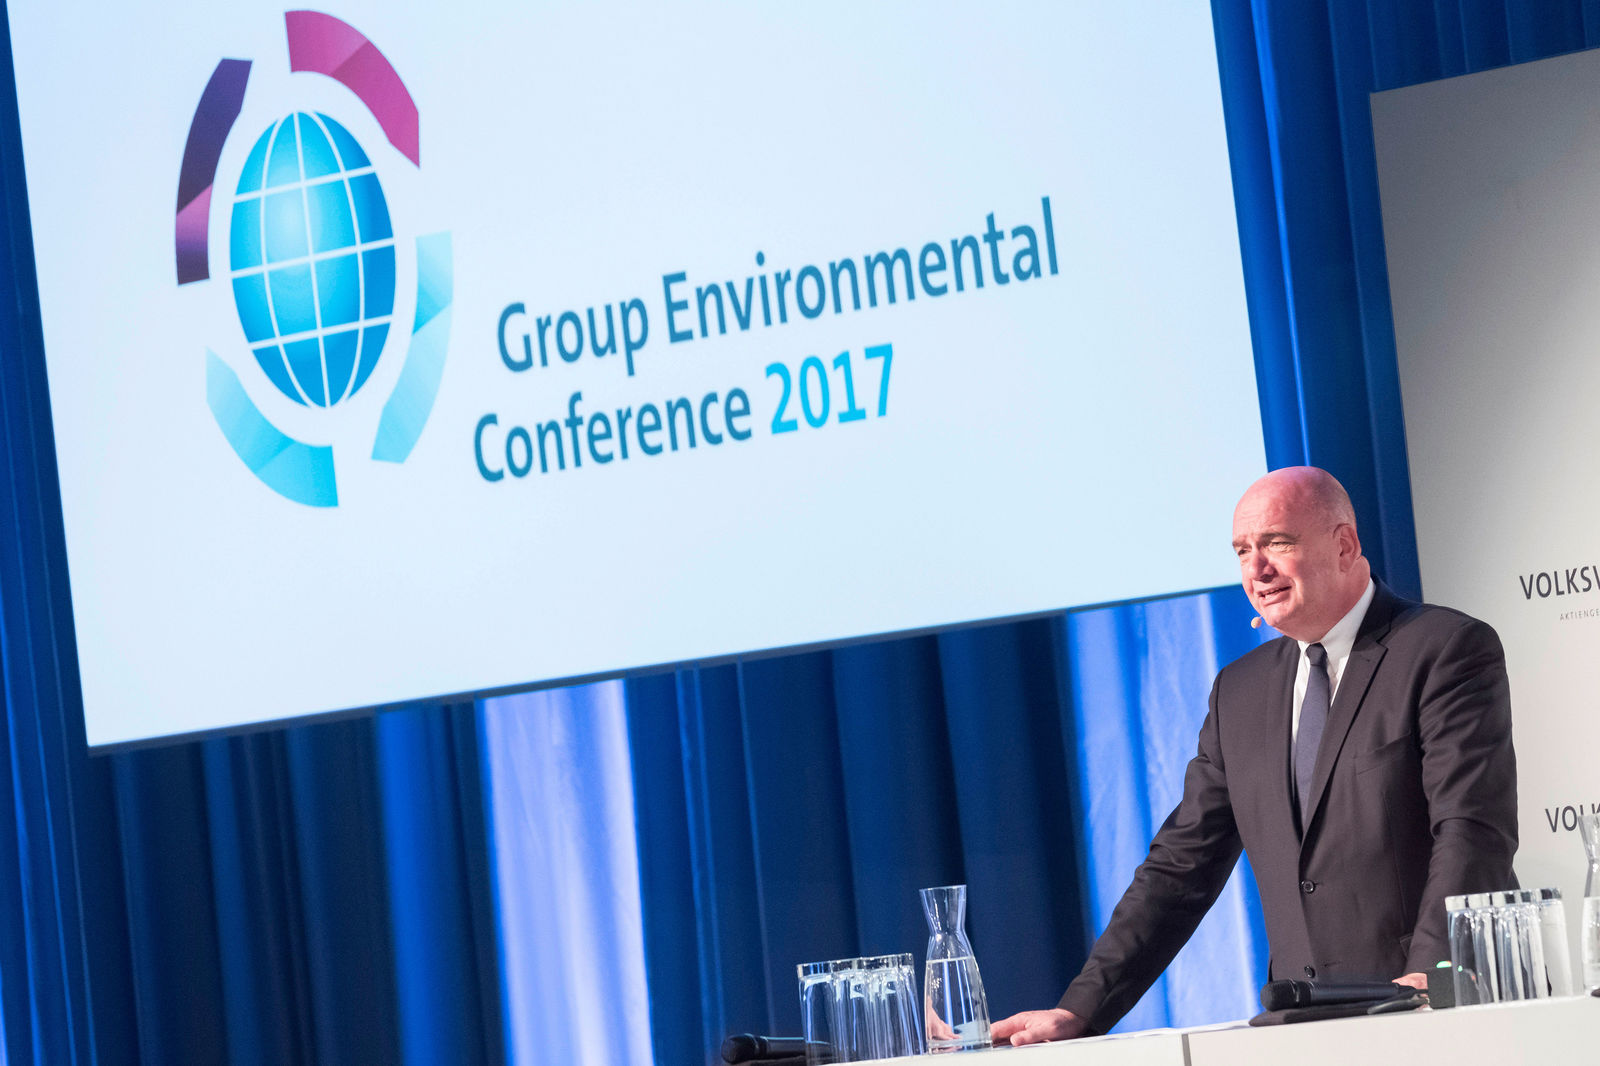 Volkswagen Group raises its environmental targets: 45 percent reduction in environmental impact by 2025